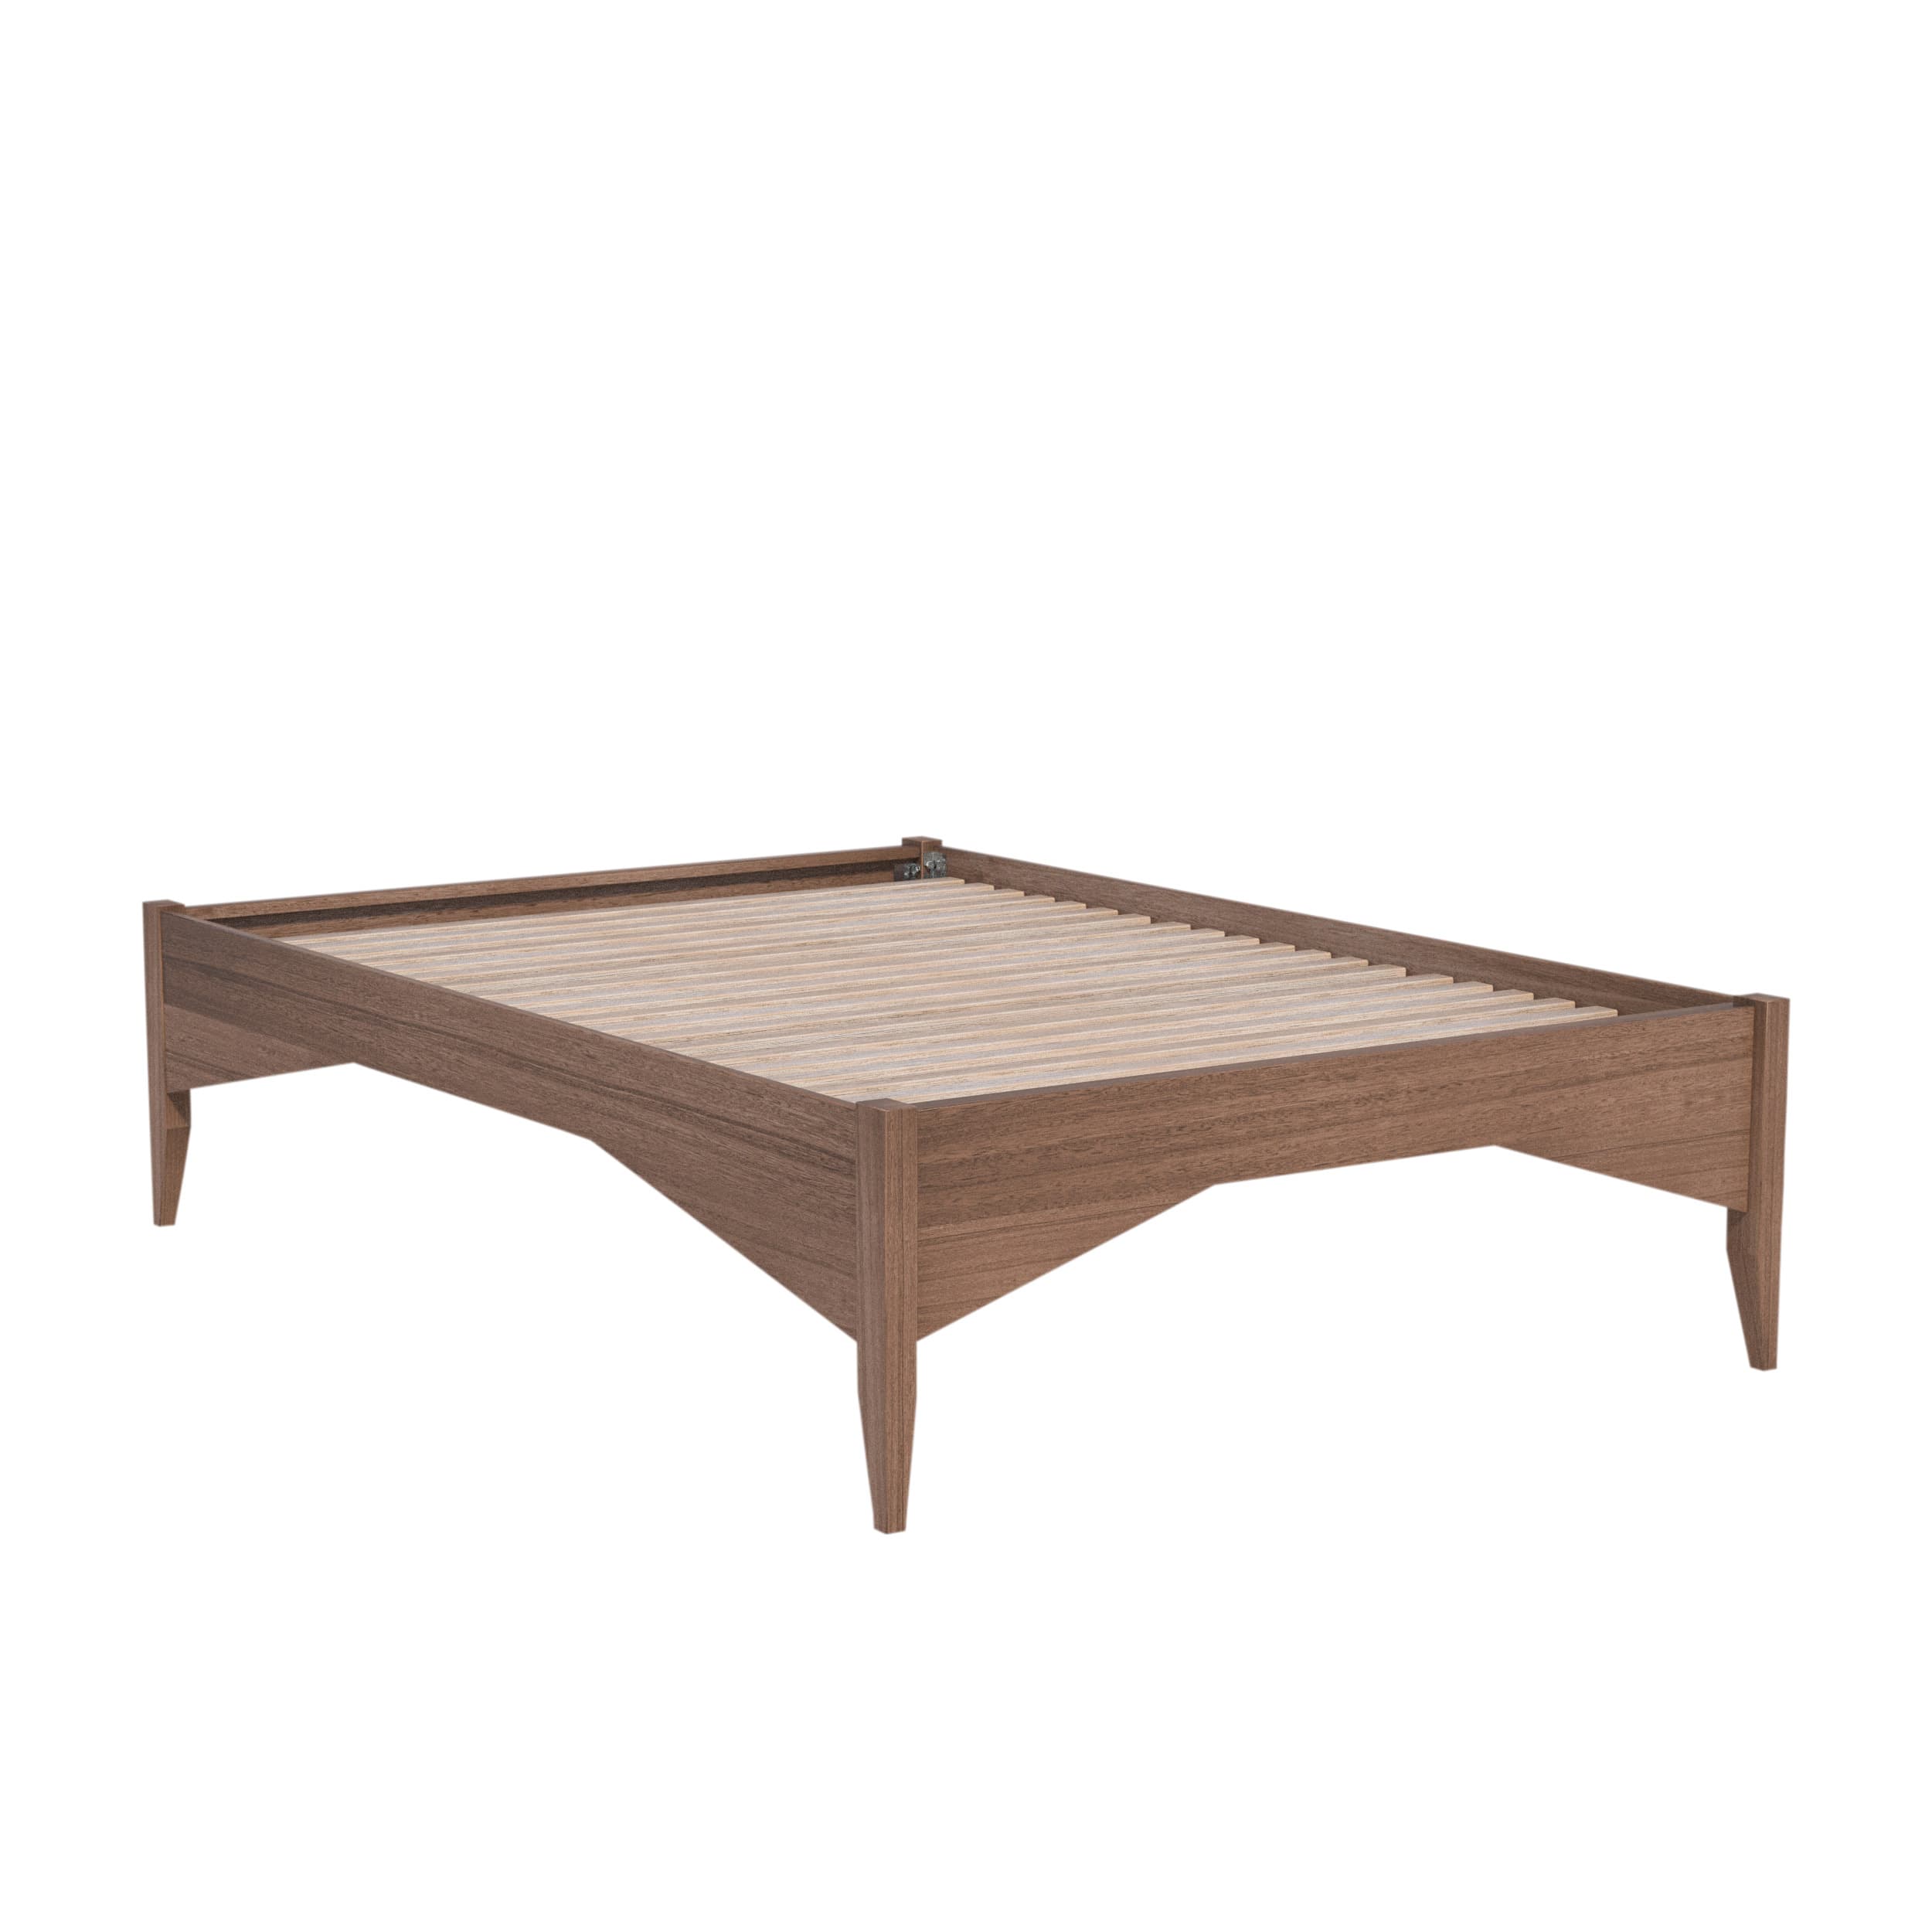 Archie Timber Bed Frame